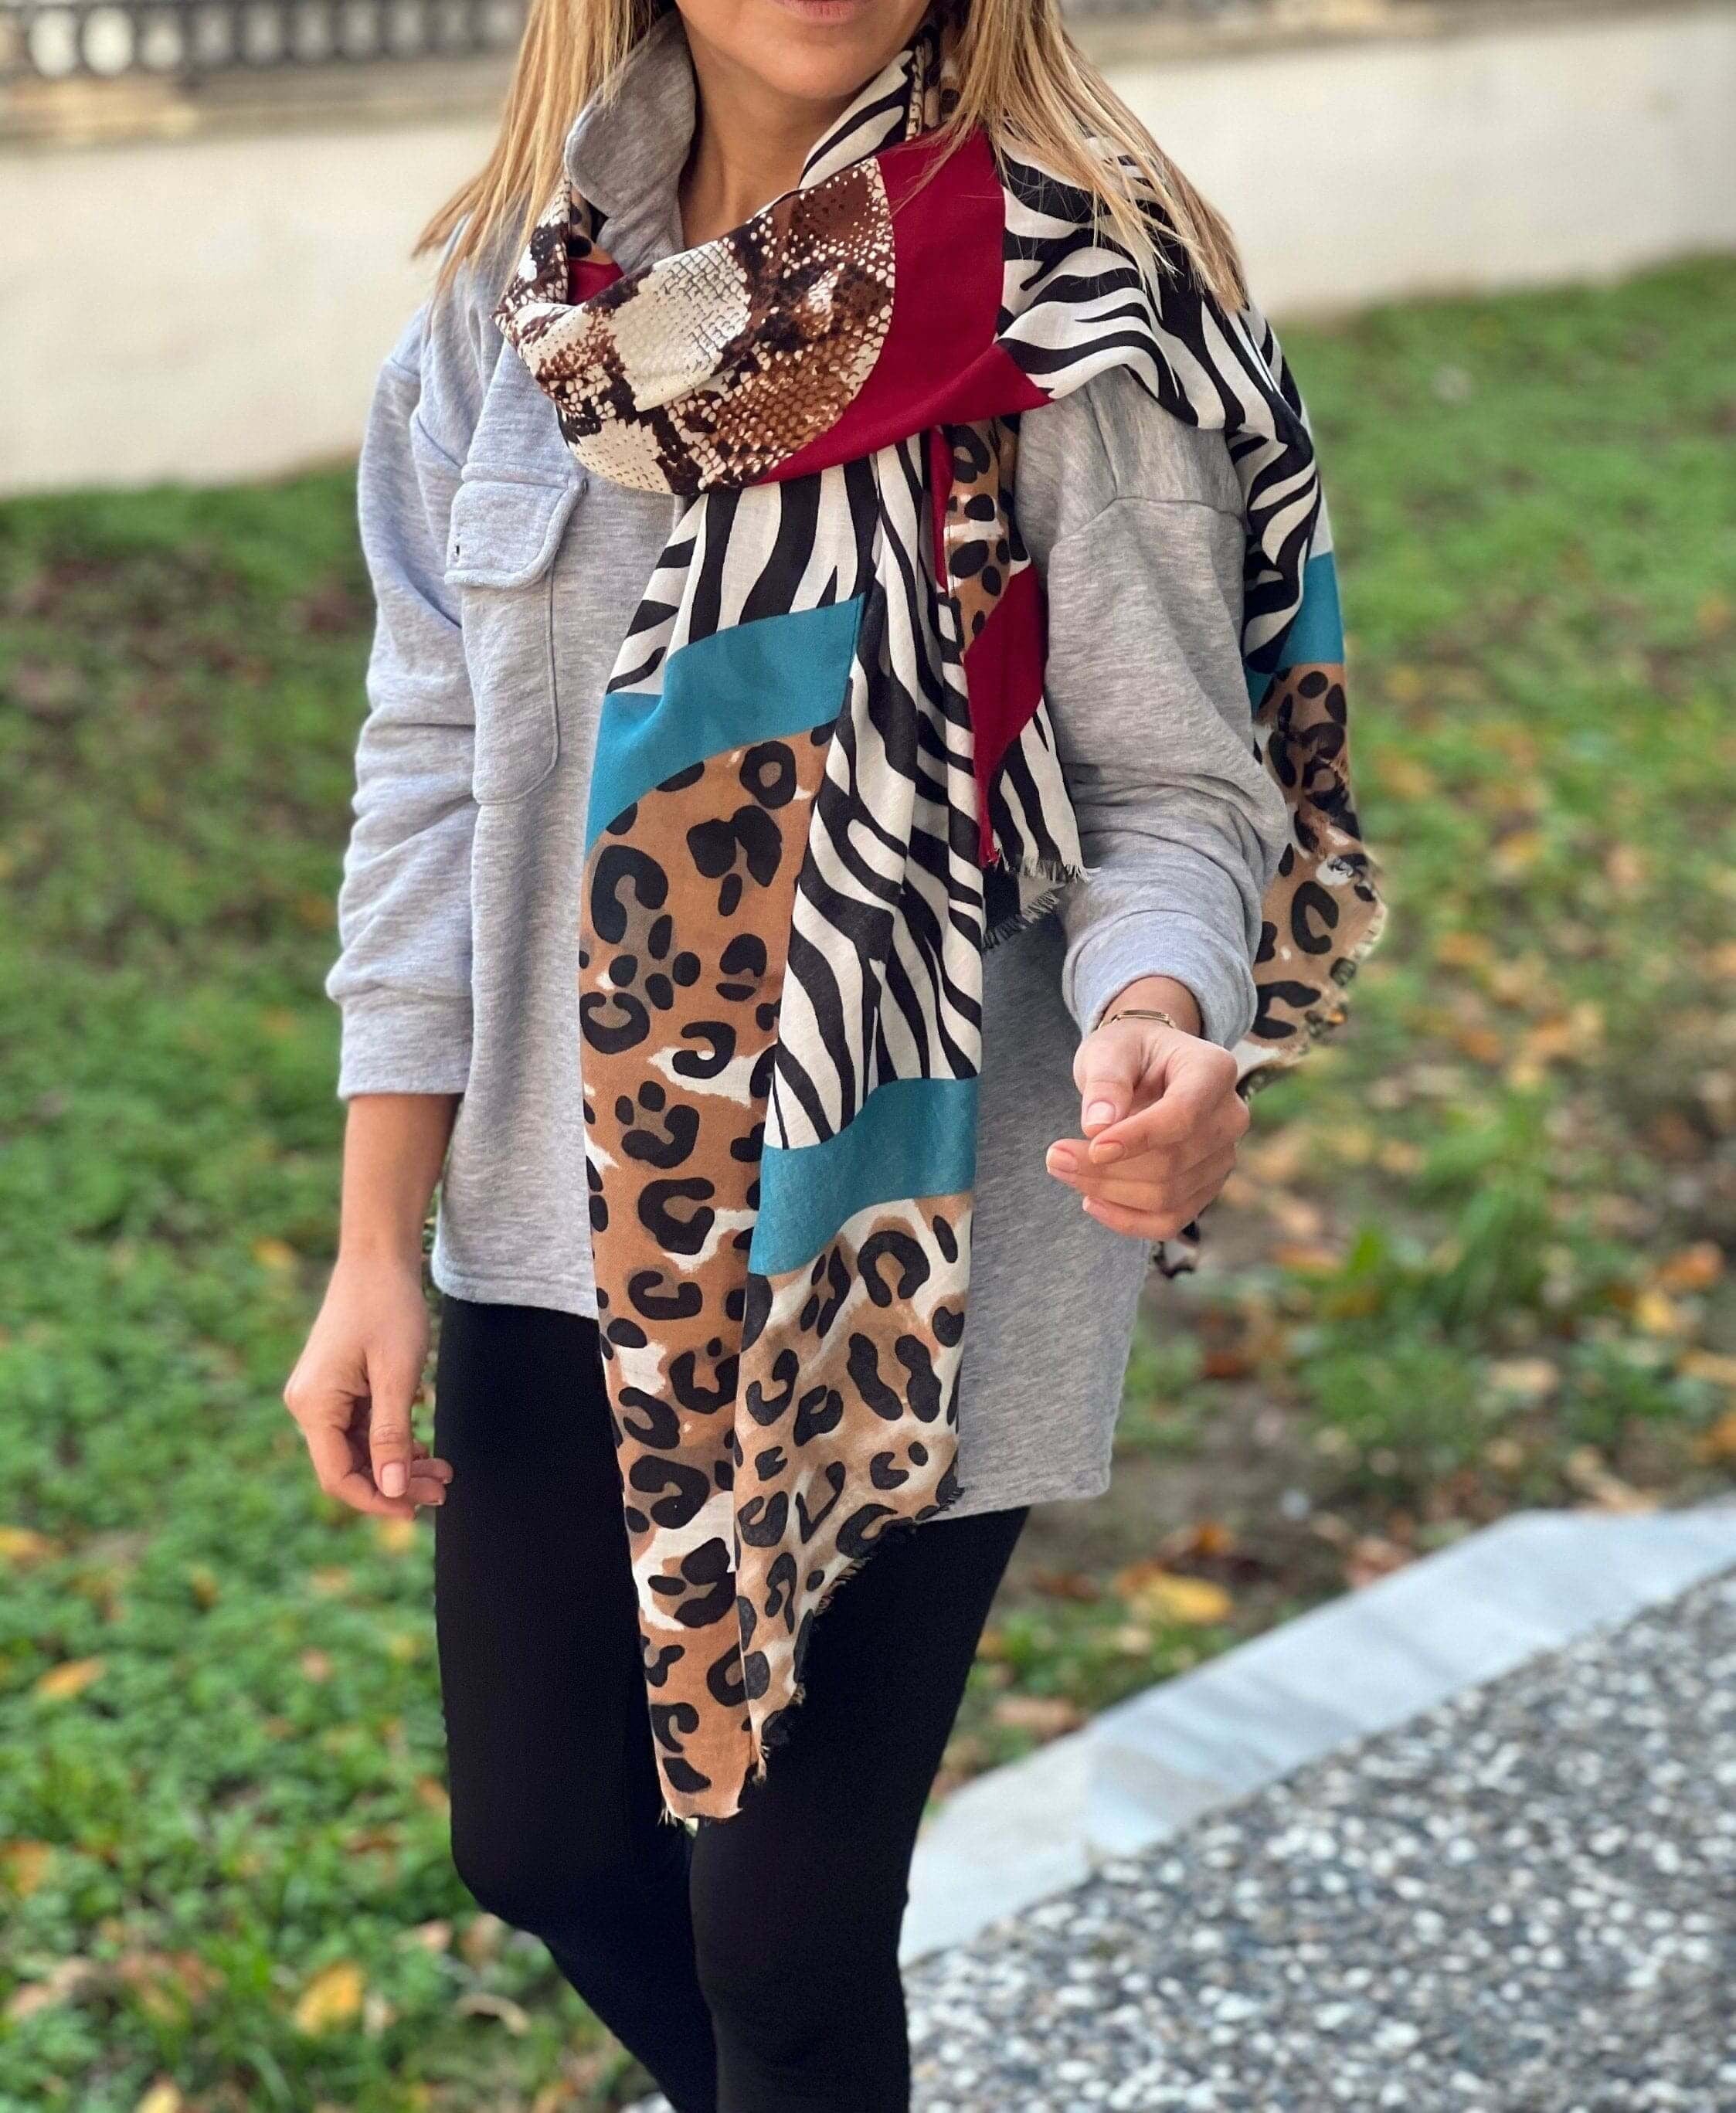 Add some wild style to your wardrobe with this stunning animal print scarf! Featuring a mix of leopard, zebra, and snake patterns, this scarf is the perfect accessory for any fashionista.